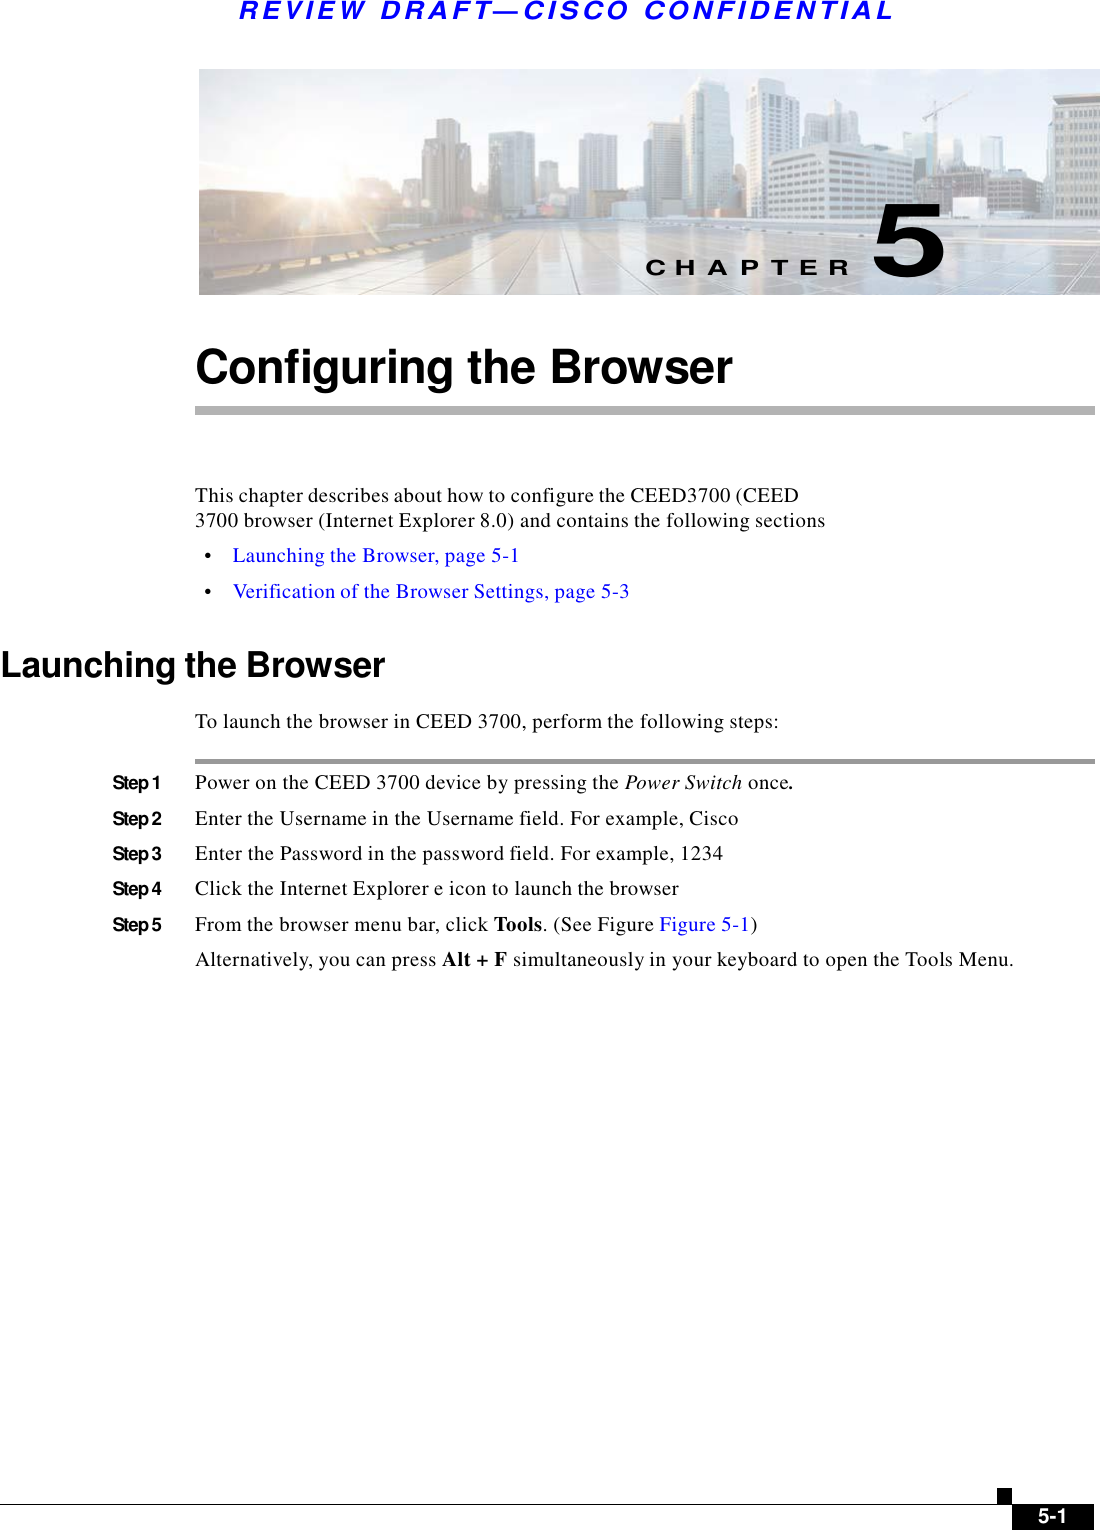  R E V I E W  DR AFT — CISC O  C O NF IDE N TIAL          C H A P T E R  5   Configuring the Browser     This chapter describes about how to configure the CEED3700 (CEED 3700 browser (Internet Explorer 8.0) and contains the following sections  •    Launching the Browser, page 5-1  •    Verification of the Browser Settings, page 5-3   Launching the Browser  To launch the browser in CEED 3700, perform the following steps:   Step 1  Power on the CEED 3700 device by pressing the Power Switch once.  Step 2  Enter the Username in the Username field. For example, Cisco  Step 3  Enter the Password in the password field. For example, 1234  Step 4  Click the Internet Explorer e icon to launch the browser  Step 5  From the browser menu bar, click Tools. (See Figure Figure 5-1)  Alternatively, you can press Alt + F simultaneously in your keyboard to open the Tools Menu.                              5-1 